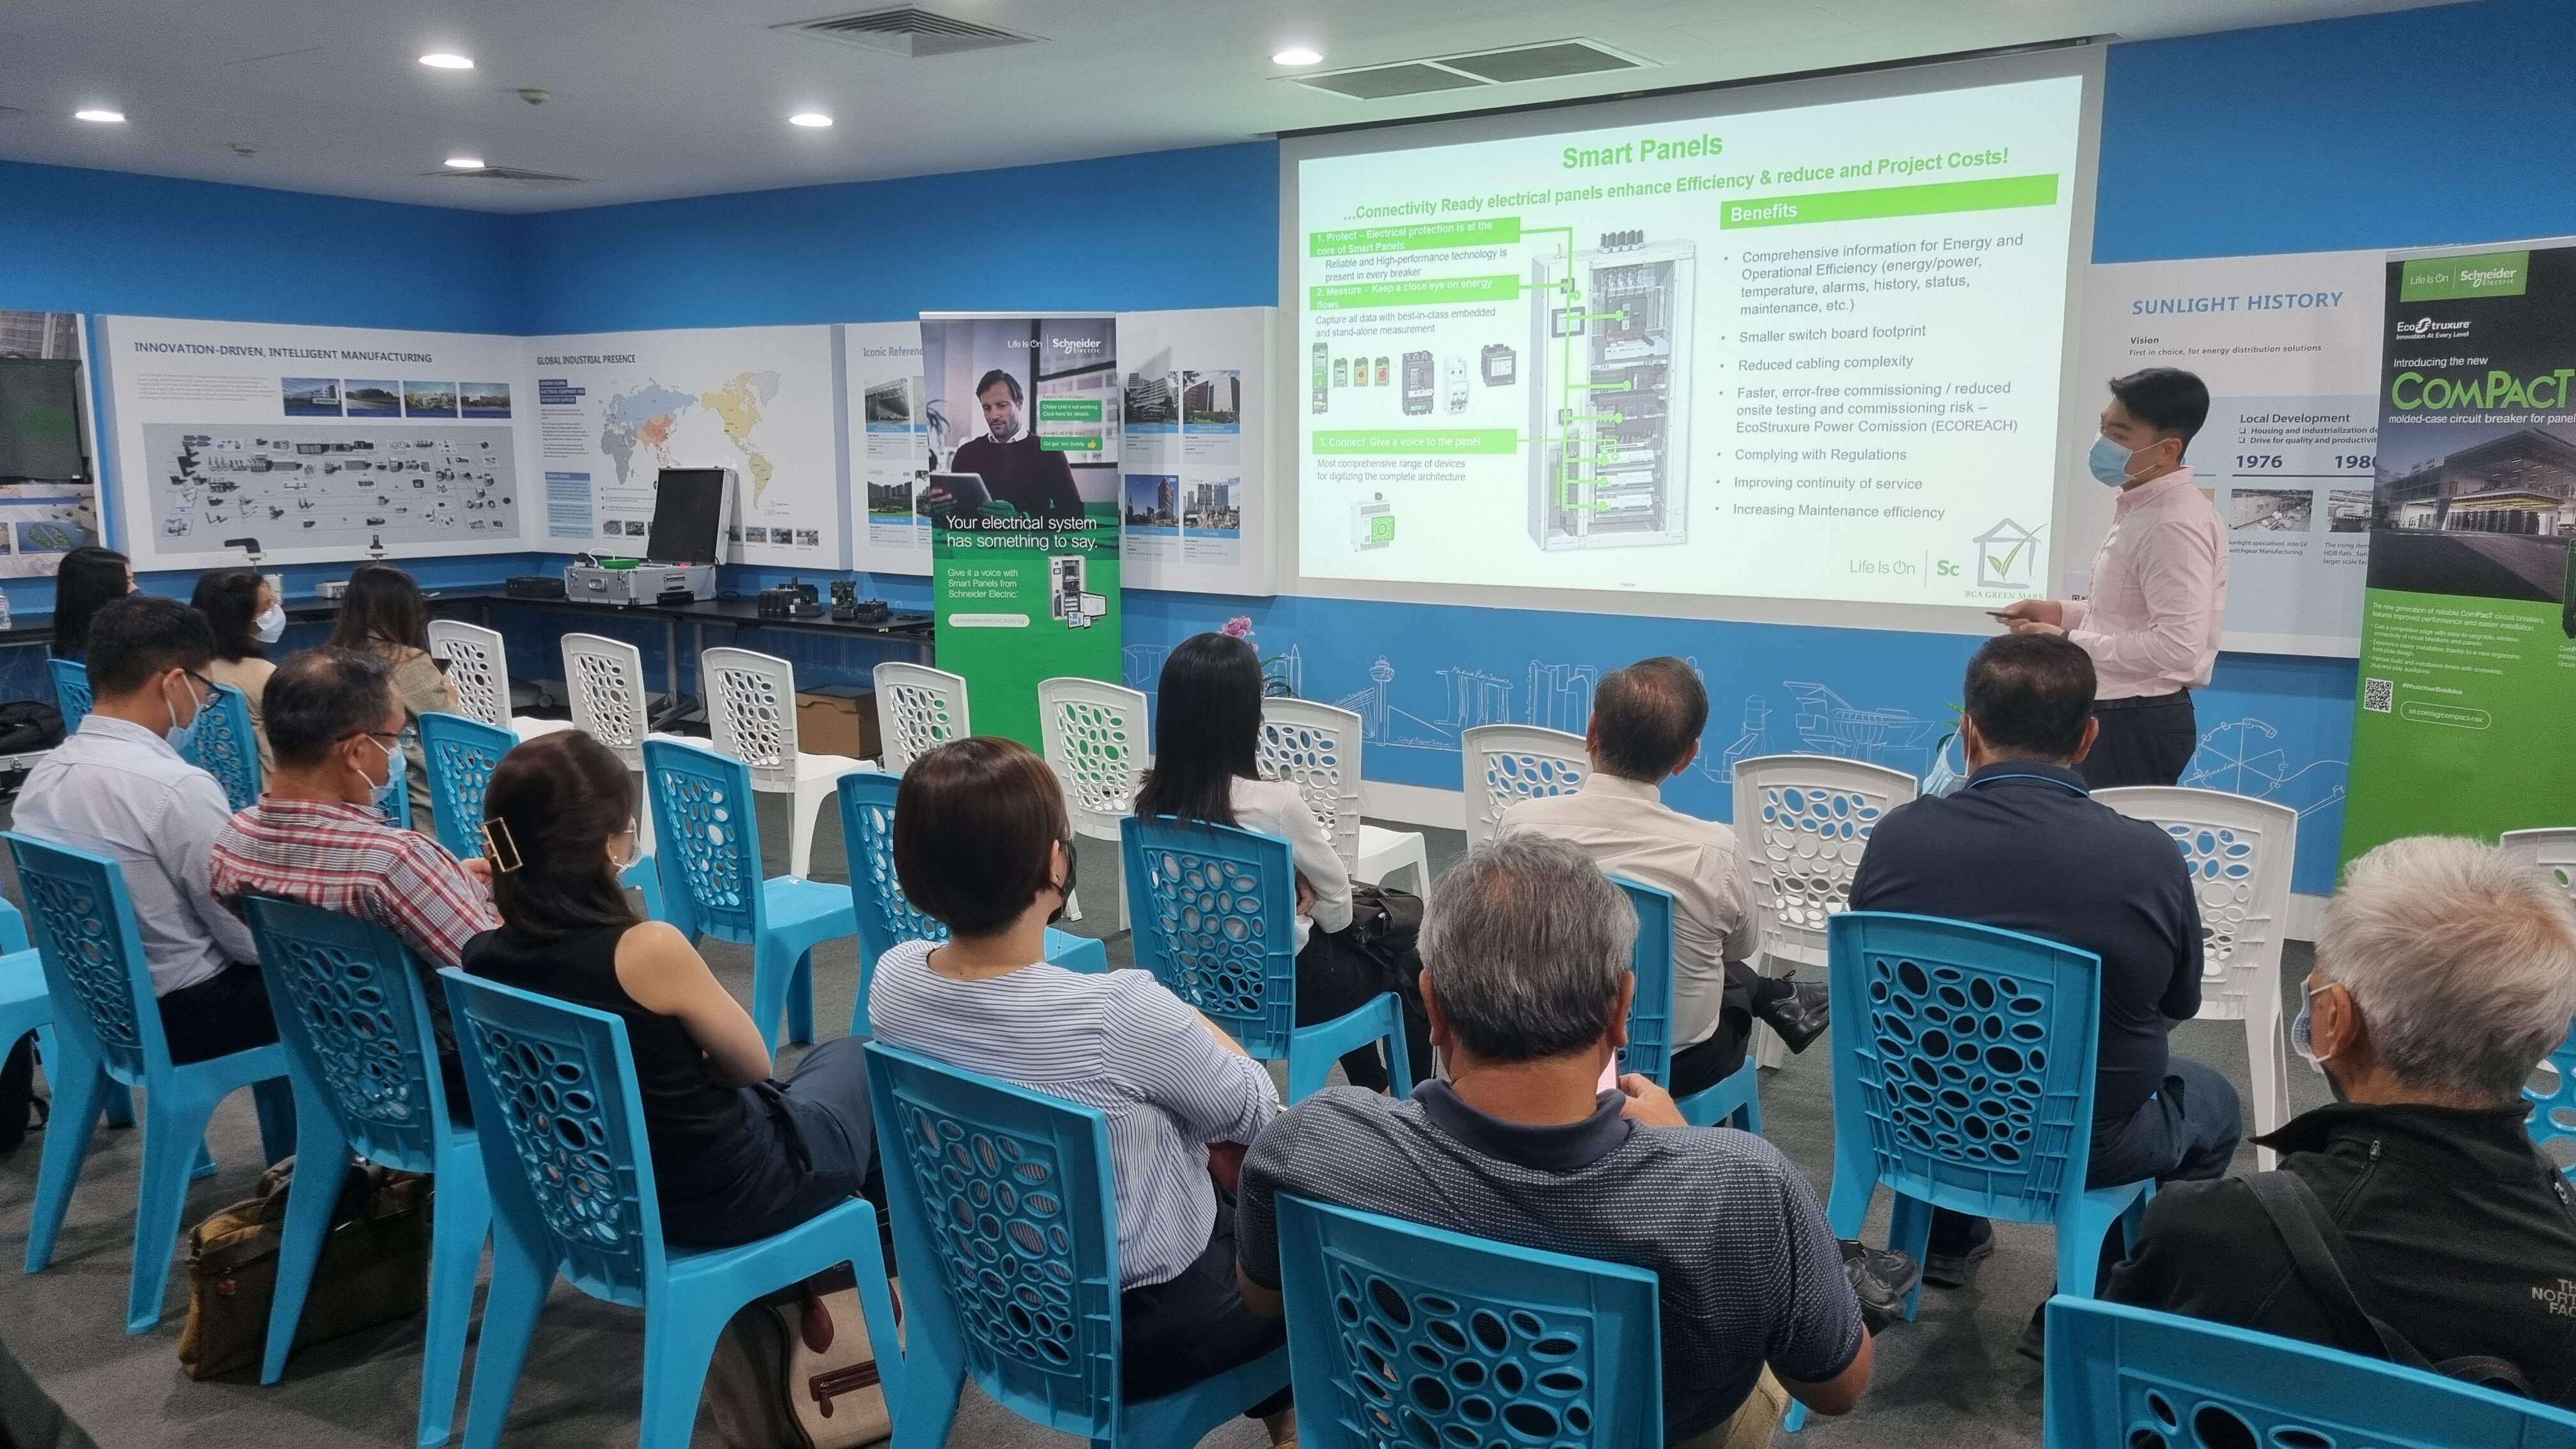 Schneider Electric Product Application Engineer, Brian Toh, giving a talk on Schneider's Smart Panel 3.0 to attendees during the Sunlight x Schneider Electric Innovation Talk 2022.